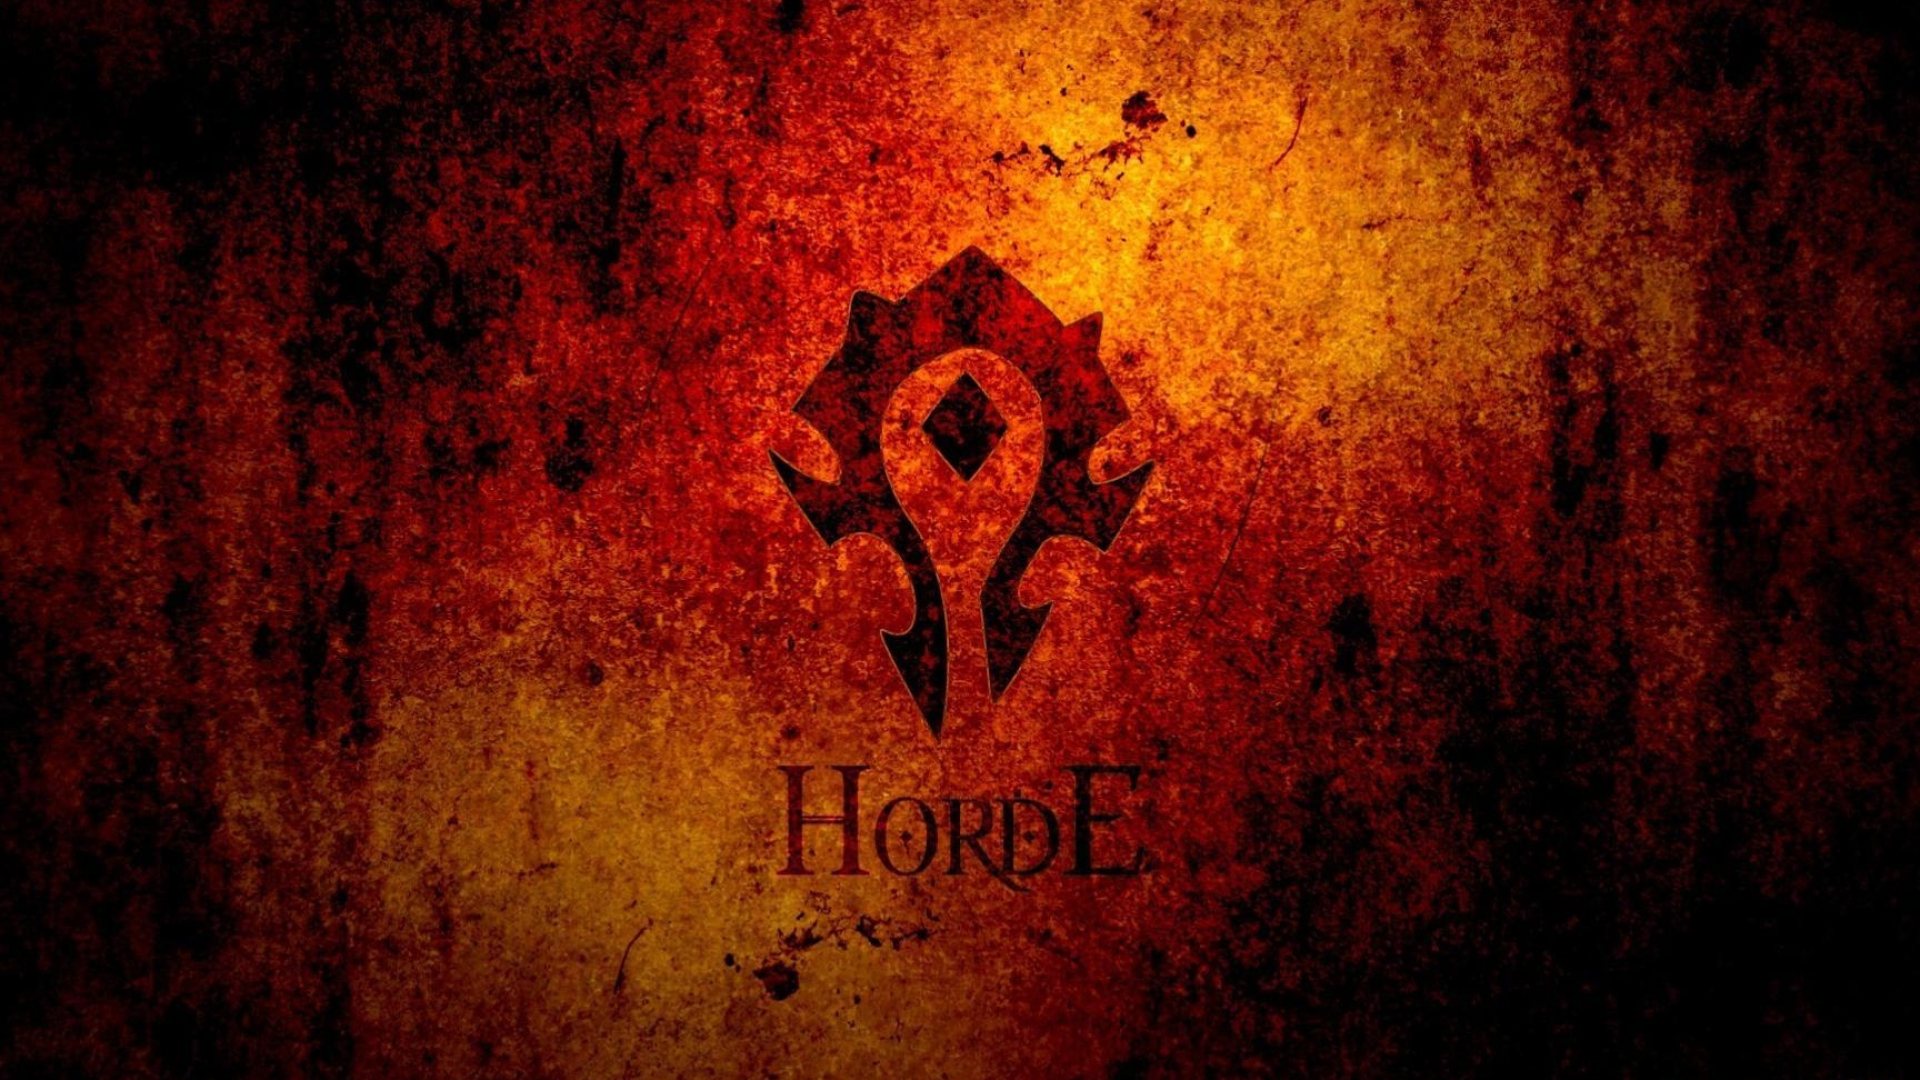 Coloring Horde wallpaper, Creative expression, Artistic inspiration, Personal touch, 1920x1080 Full HD Desktop